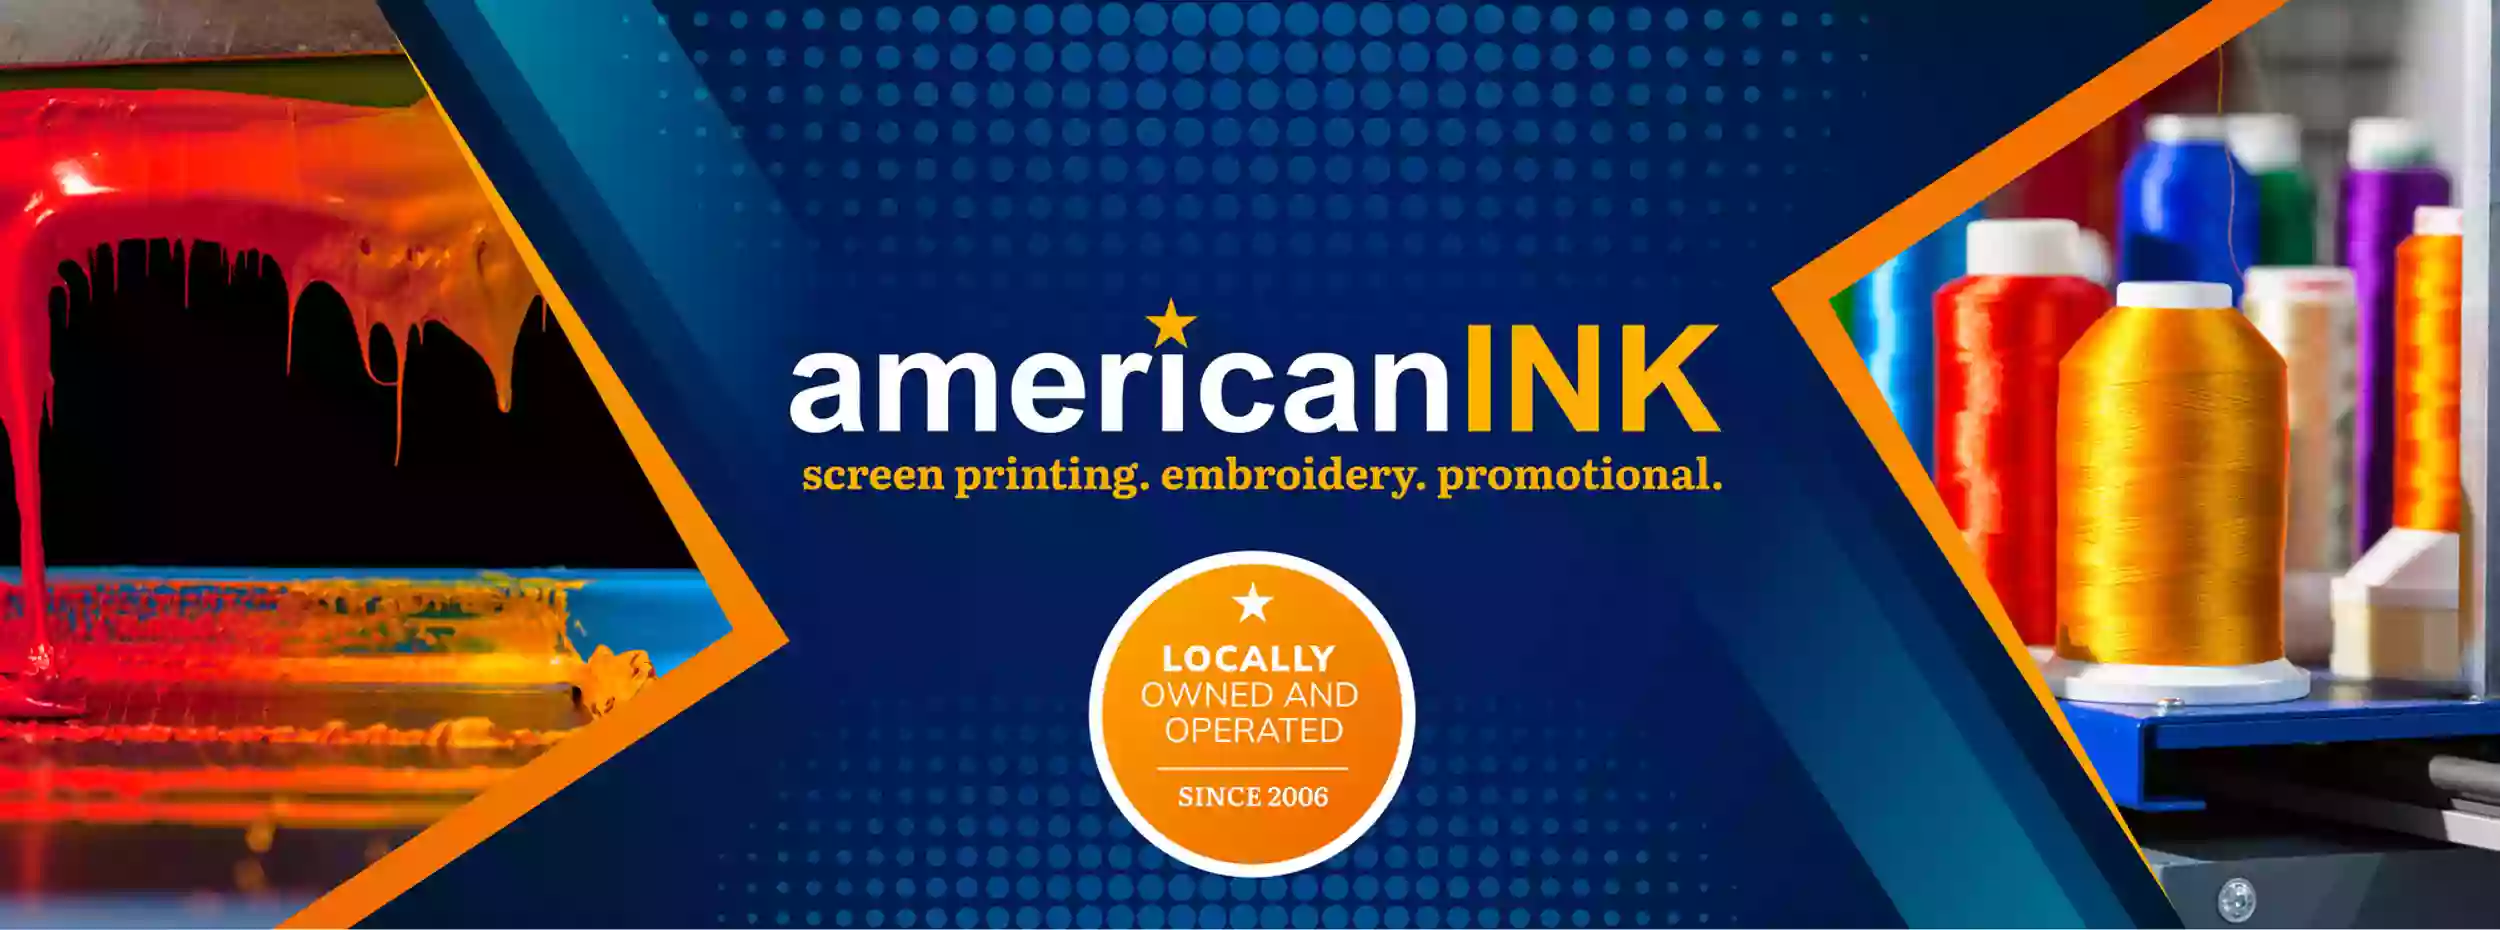 American Ink Screen Printing & Embroidery